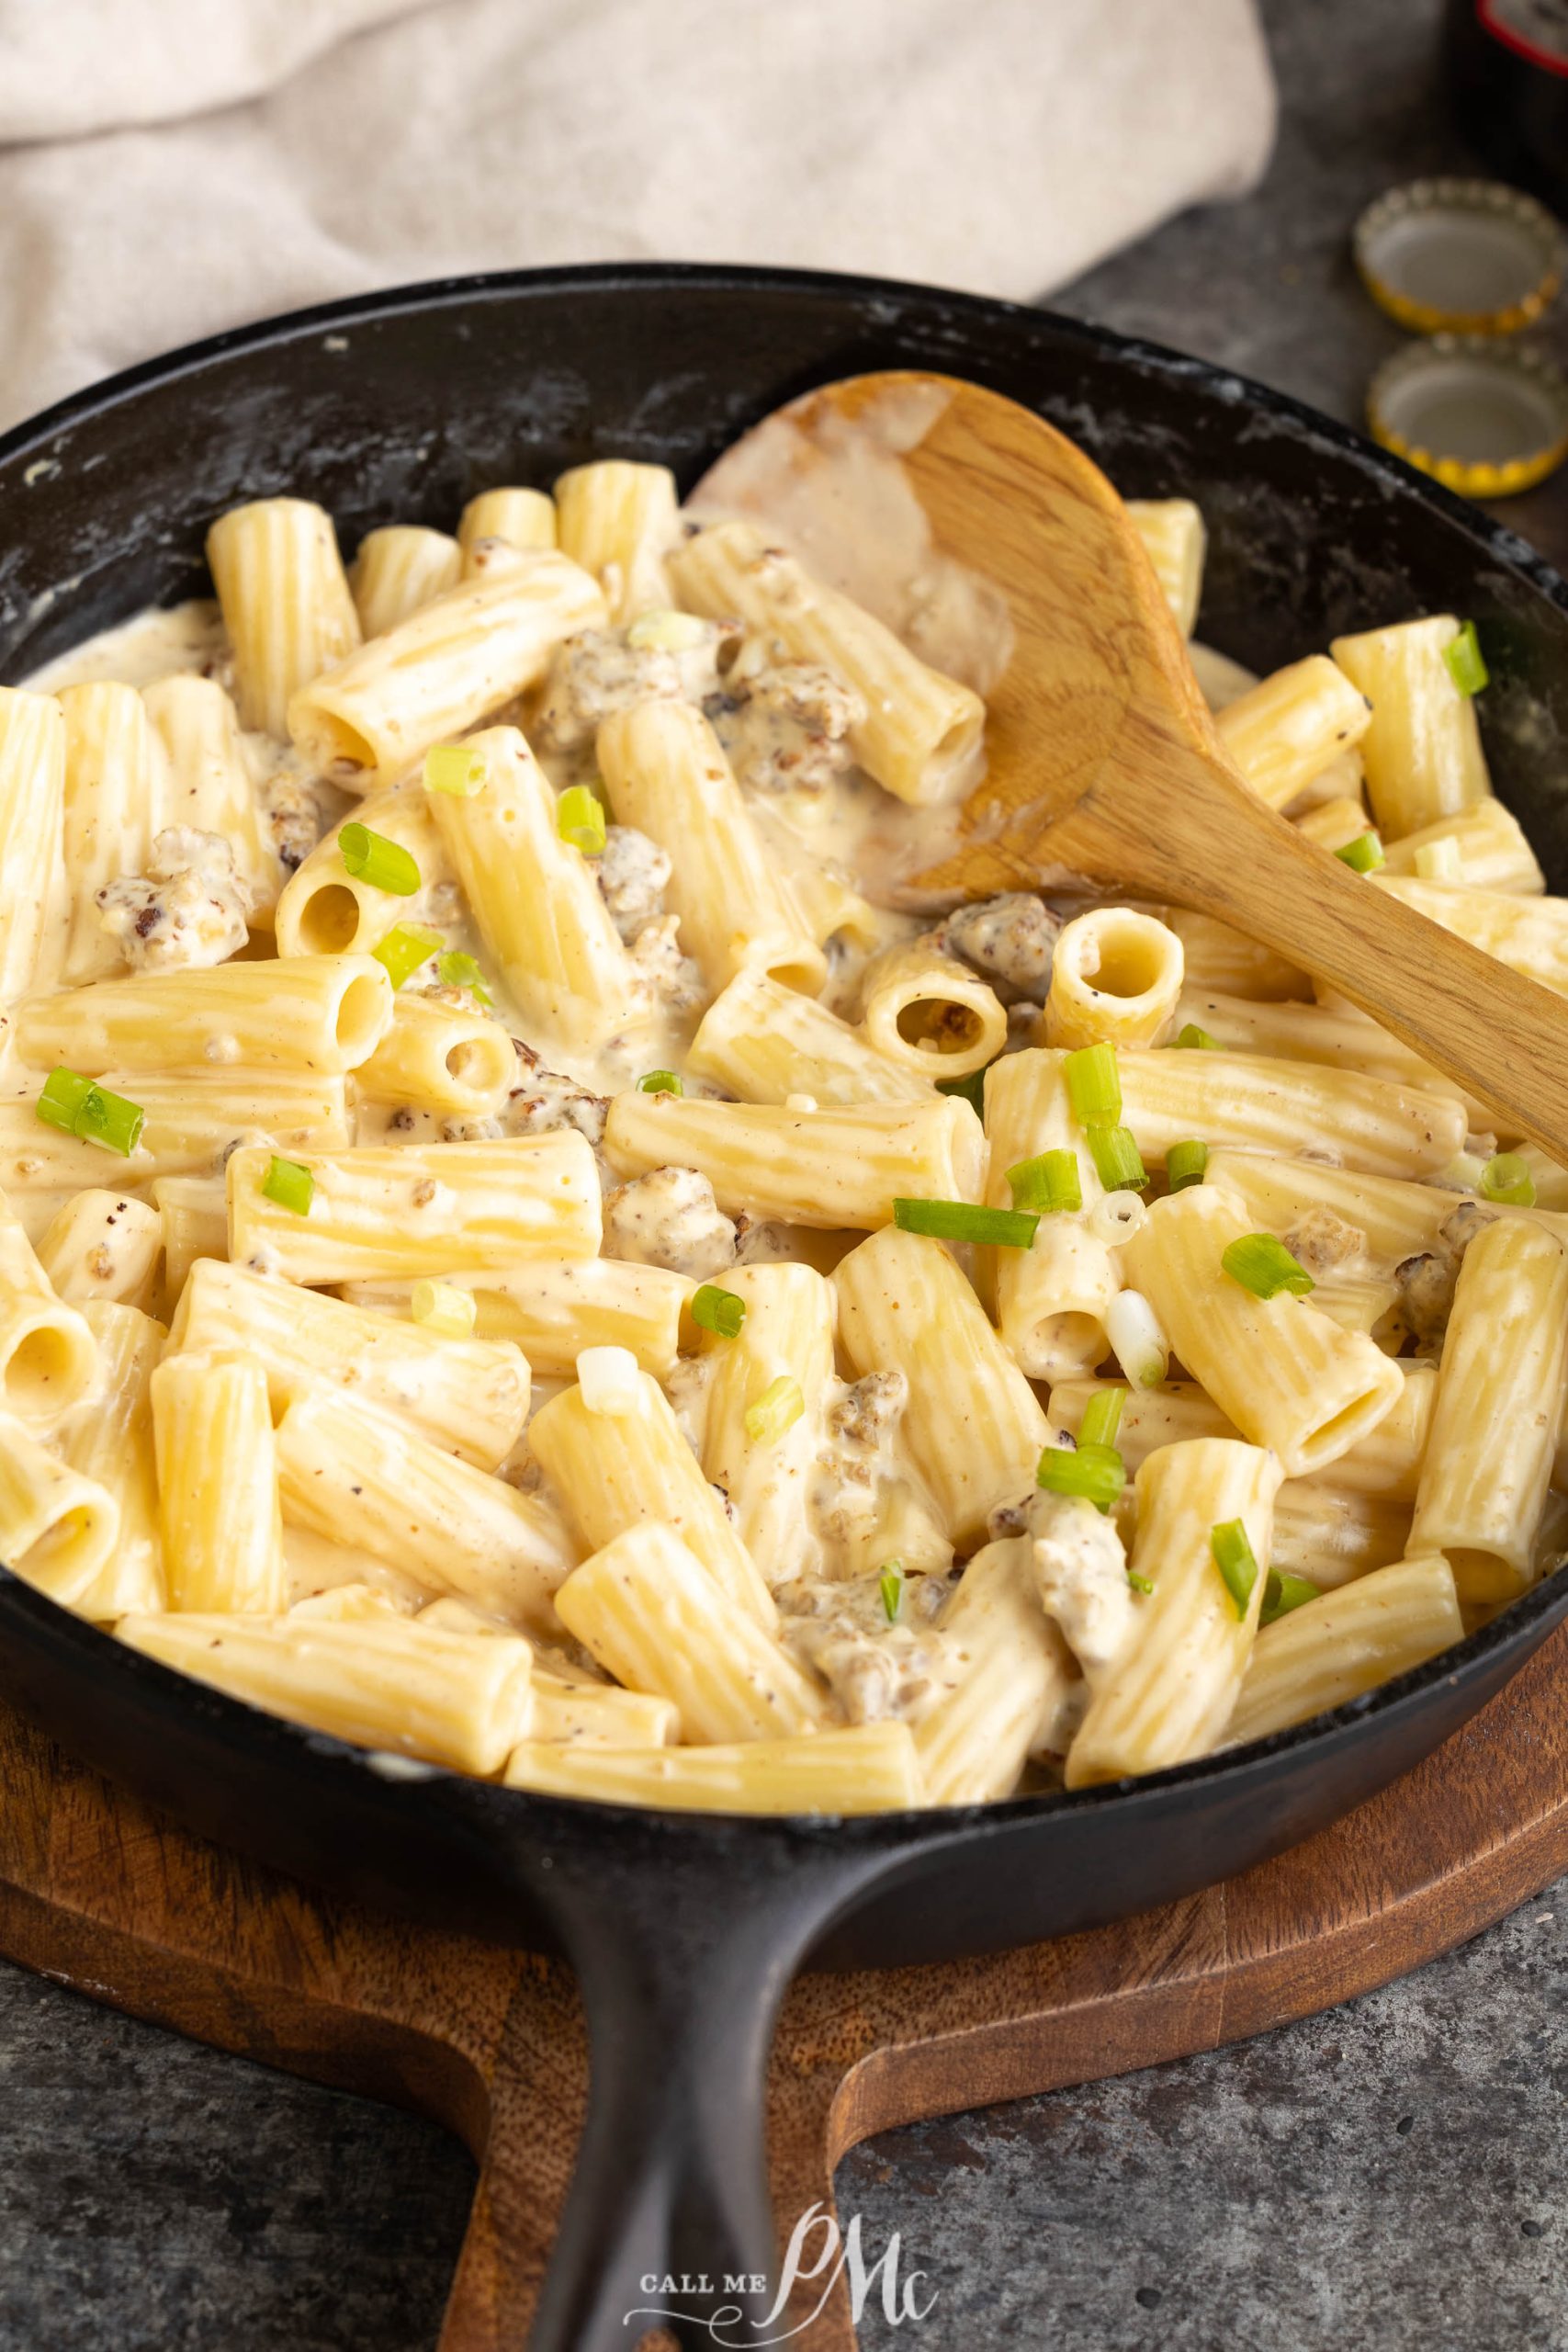 A skillet full of pasta with cheese and green onions.